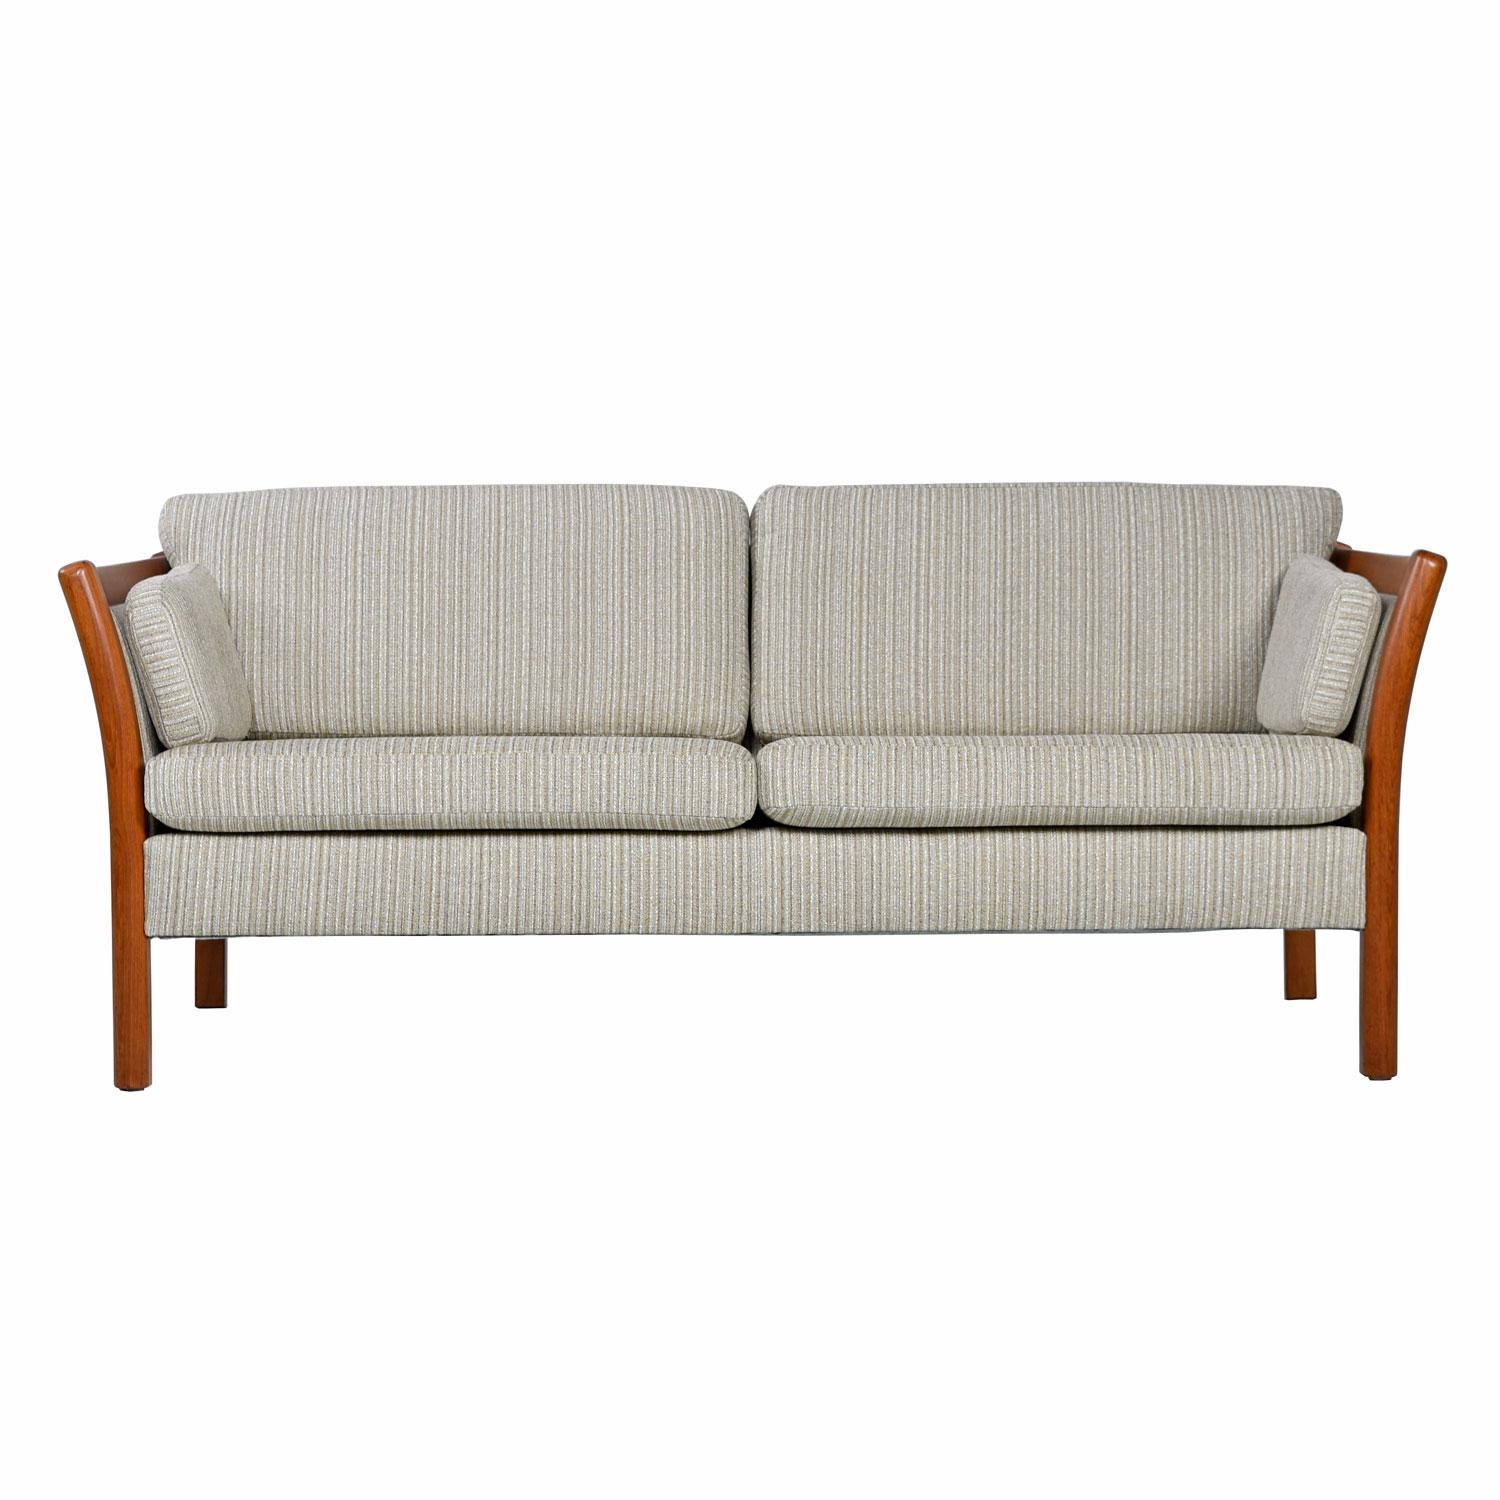 Super comfortable, fully restored, Danish Modern teak Stouby settee. Still doing business after over 100 years, Stouby’s Scandinavian quality rings true in the design of these chairs. Frames constructed of bent, teak wood. Masterfully engineered to